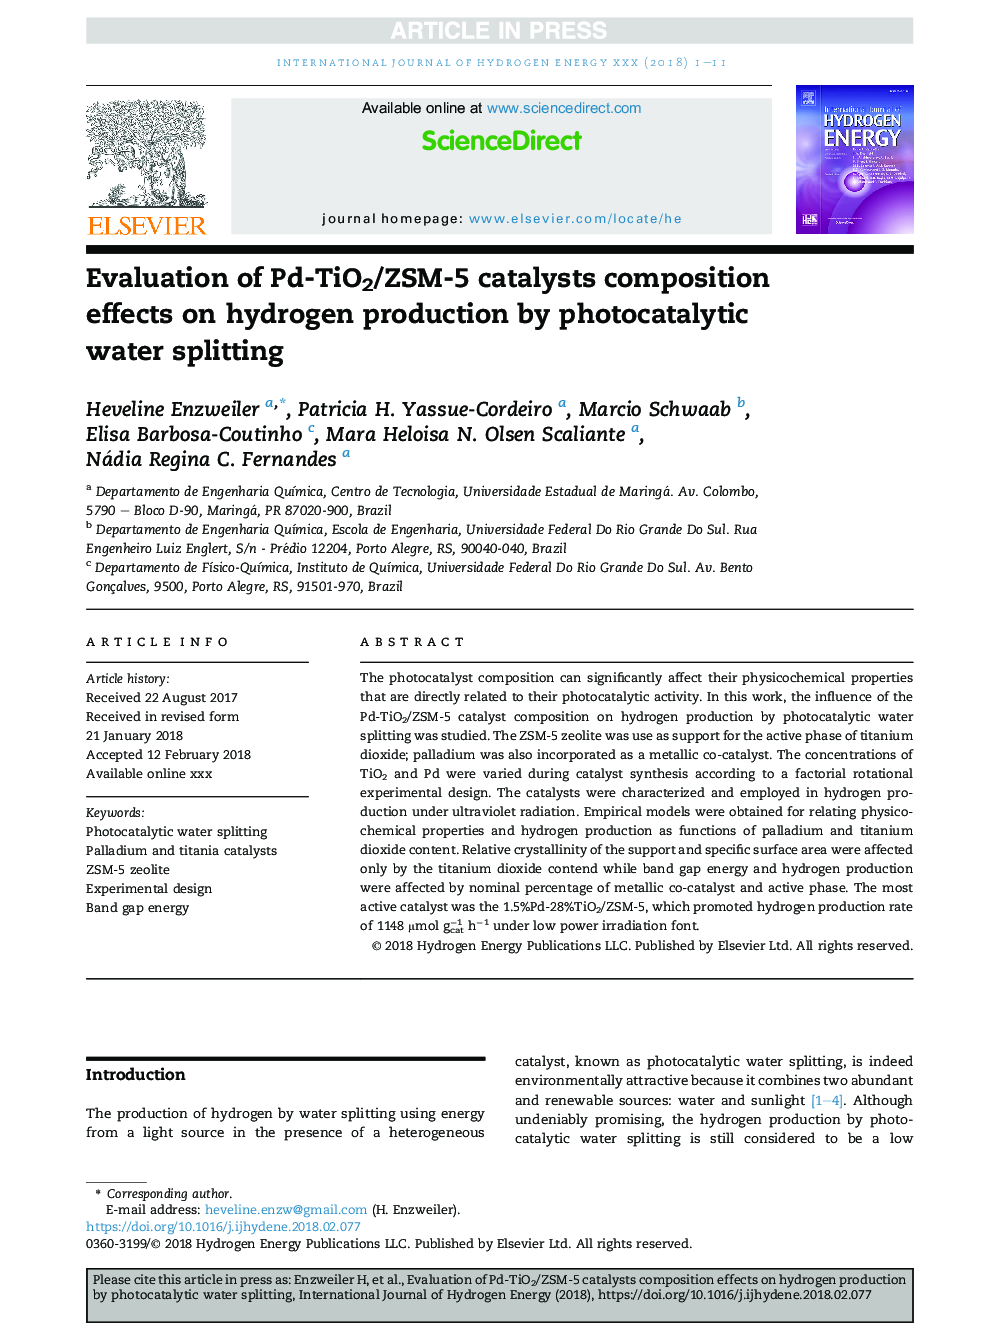 Evaluation of Pd-TiO2/ZSM-5 catalysts composition effects on hydrogen production by photocatalytic water splitting